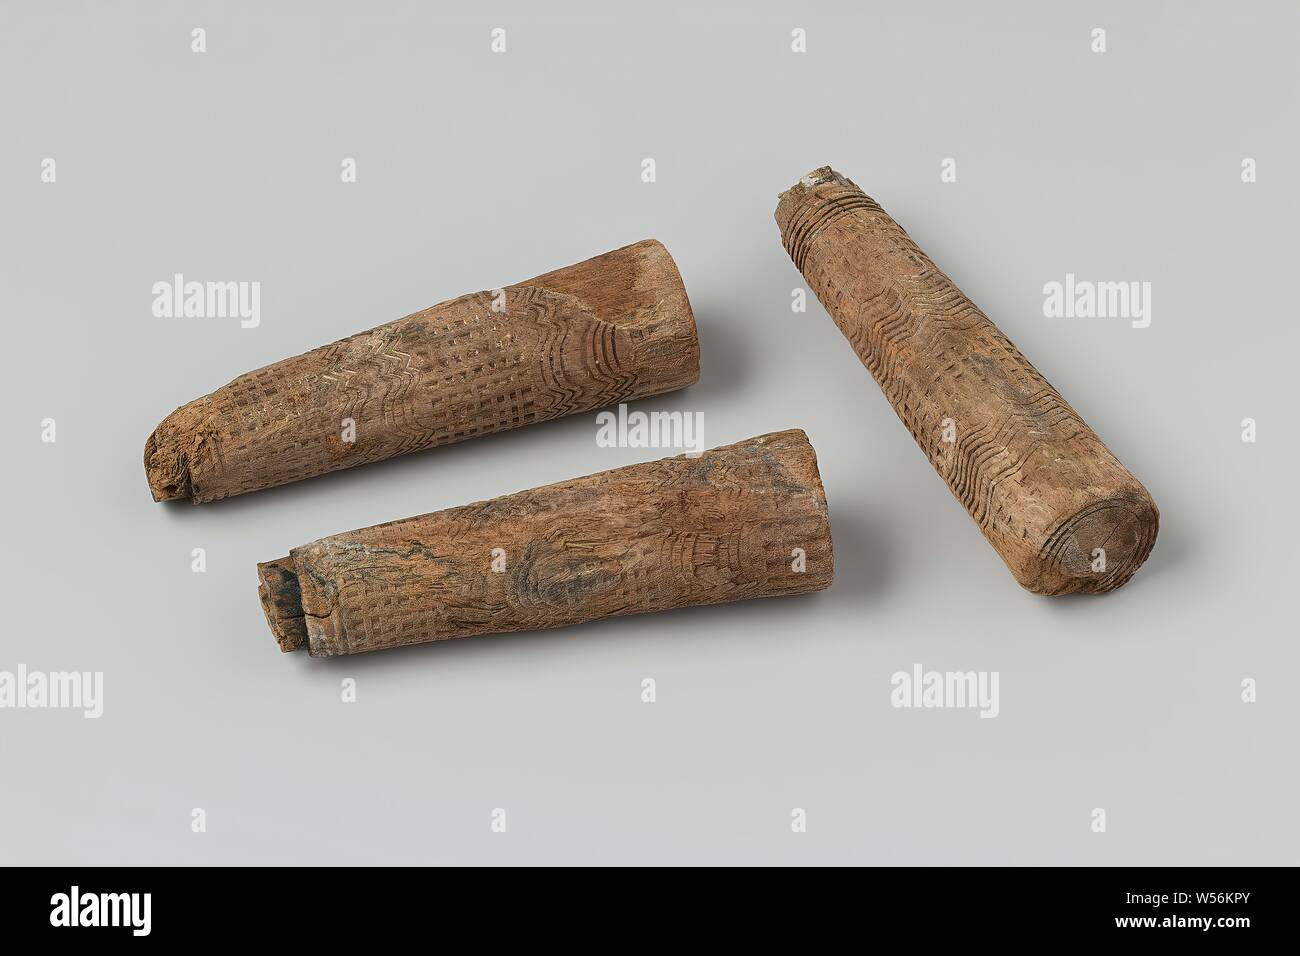 Knife lifts from the wreck of the East India dealer Hollandia, Knife, handle, ferrules, Annet, Dutch East India Company, Hollandia (ship), anonymous, Netherlands, 1700 - in or before 13-Aug-1743, wood (plant material), h 8.8 cm × d 2.5 cm Stock Photo